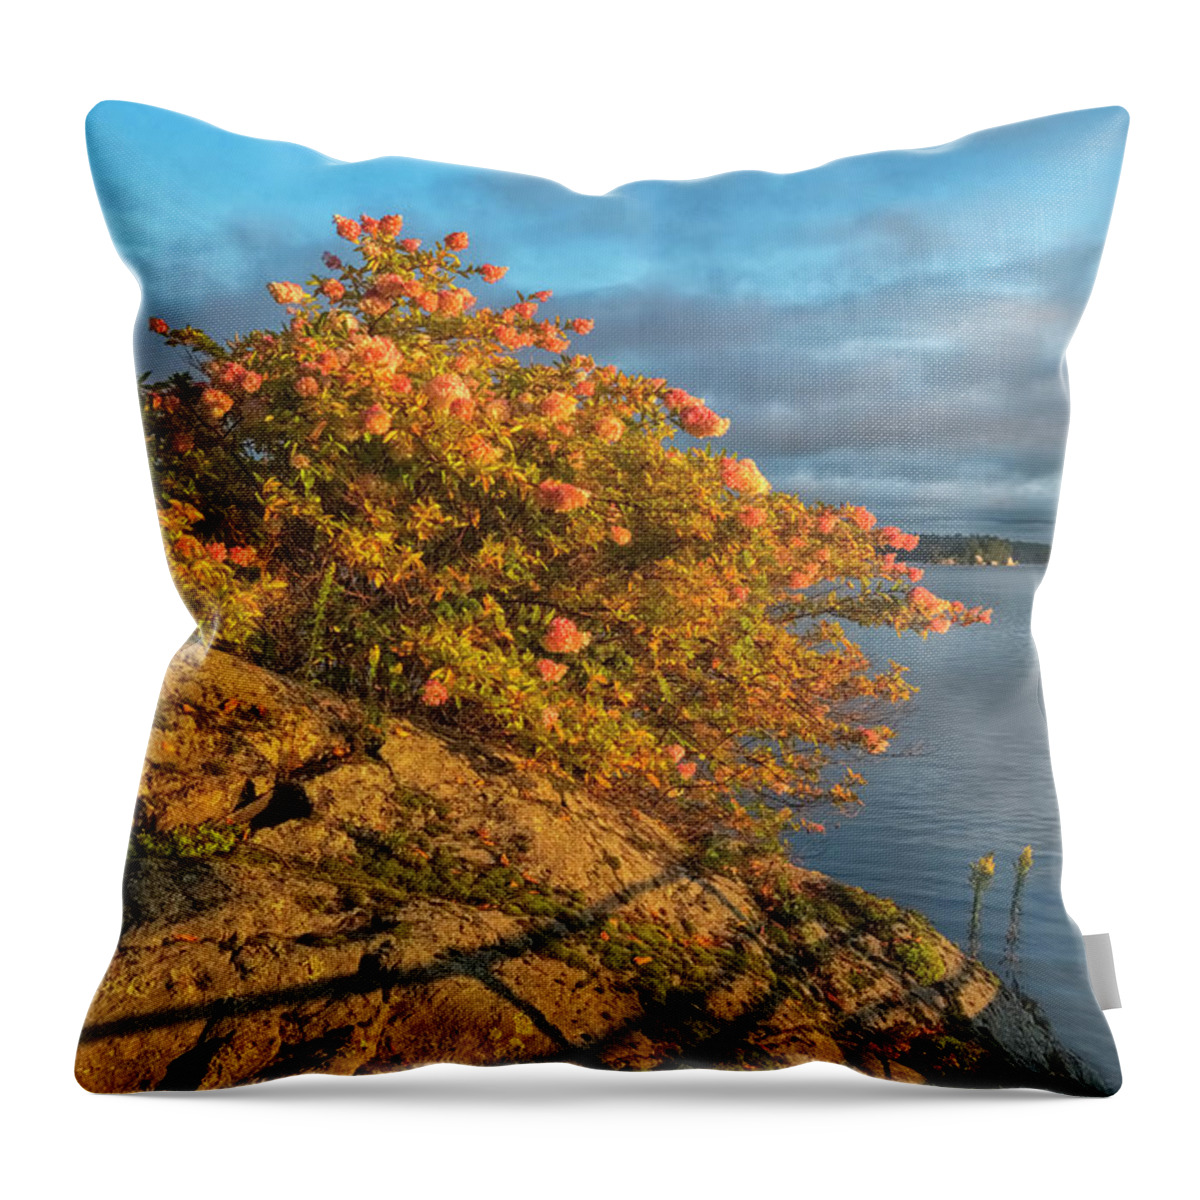 St Lawrence Seaway Throw Pillow featuring the photograph Rock And Hydrangeas by Tom Singleton